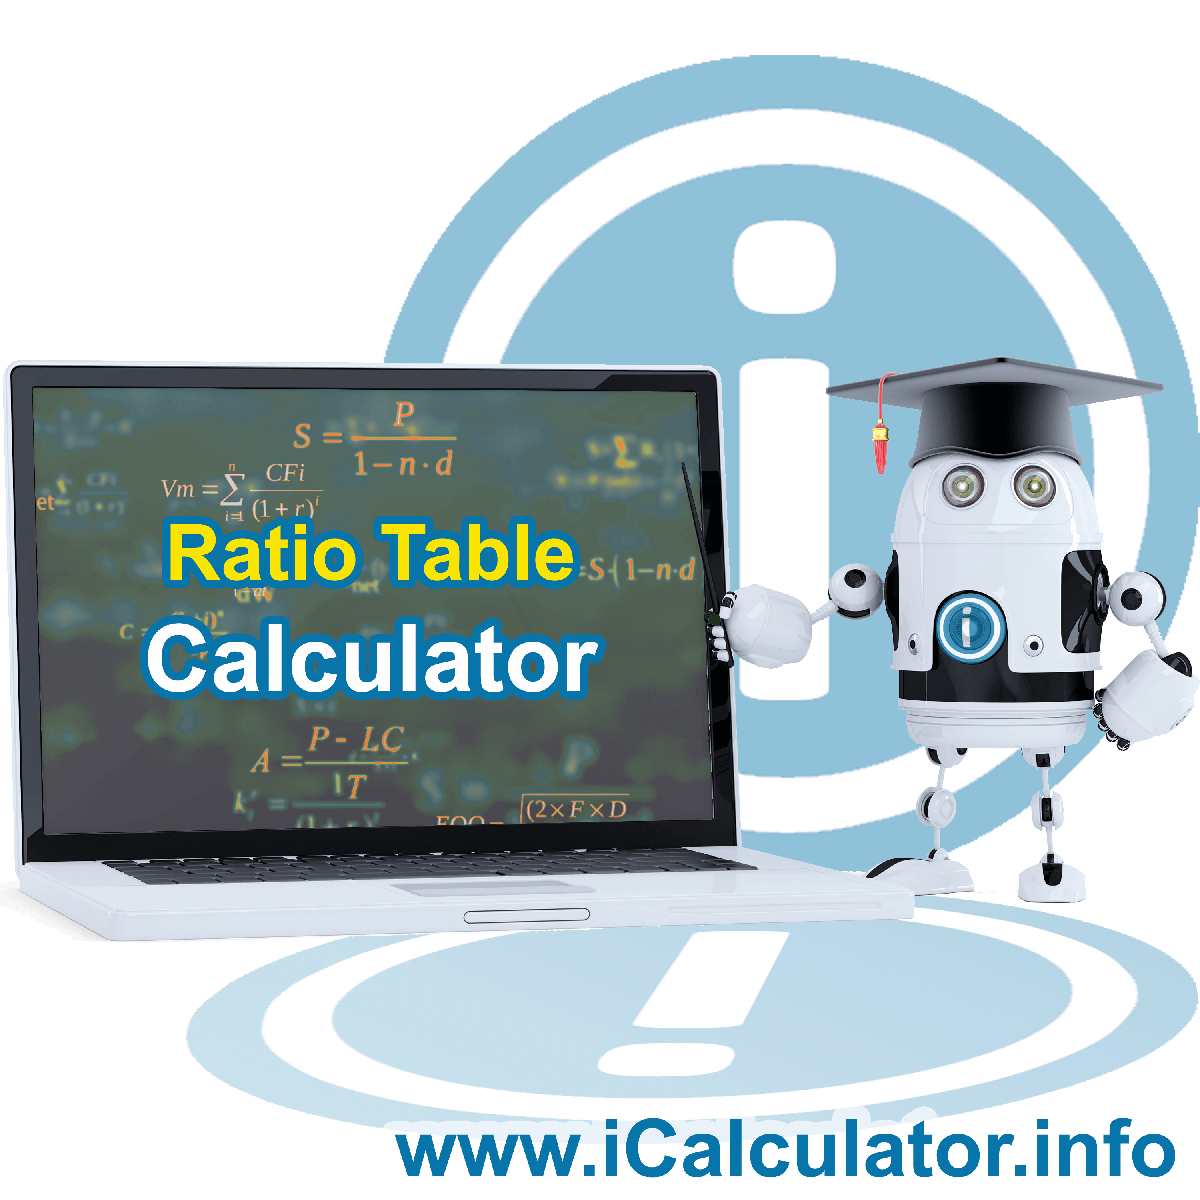 Ratio Table Creator. This image shows the properties and ratio table creator formula for the Ratio Table Creator